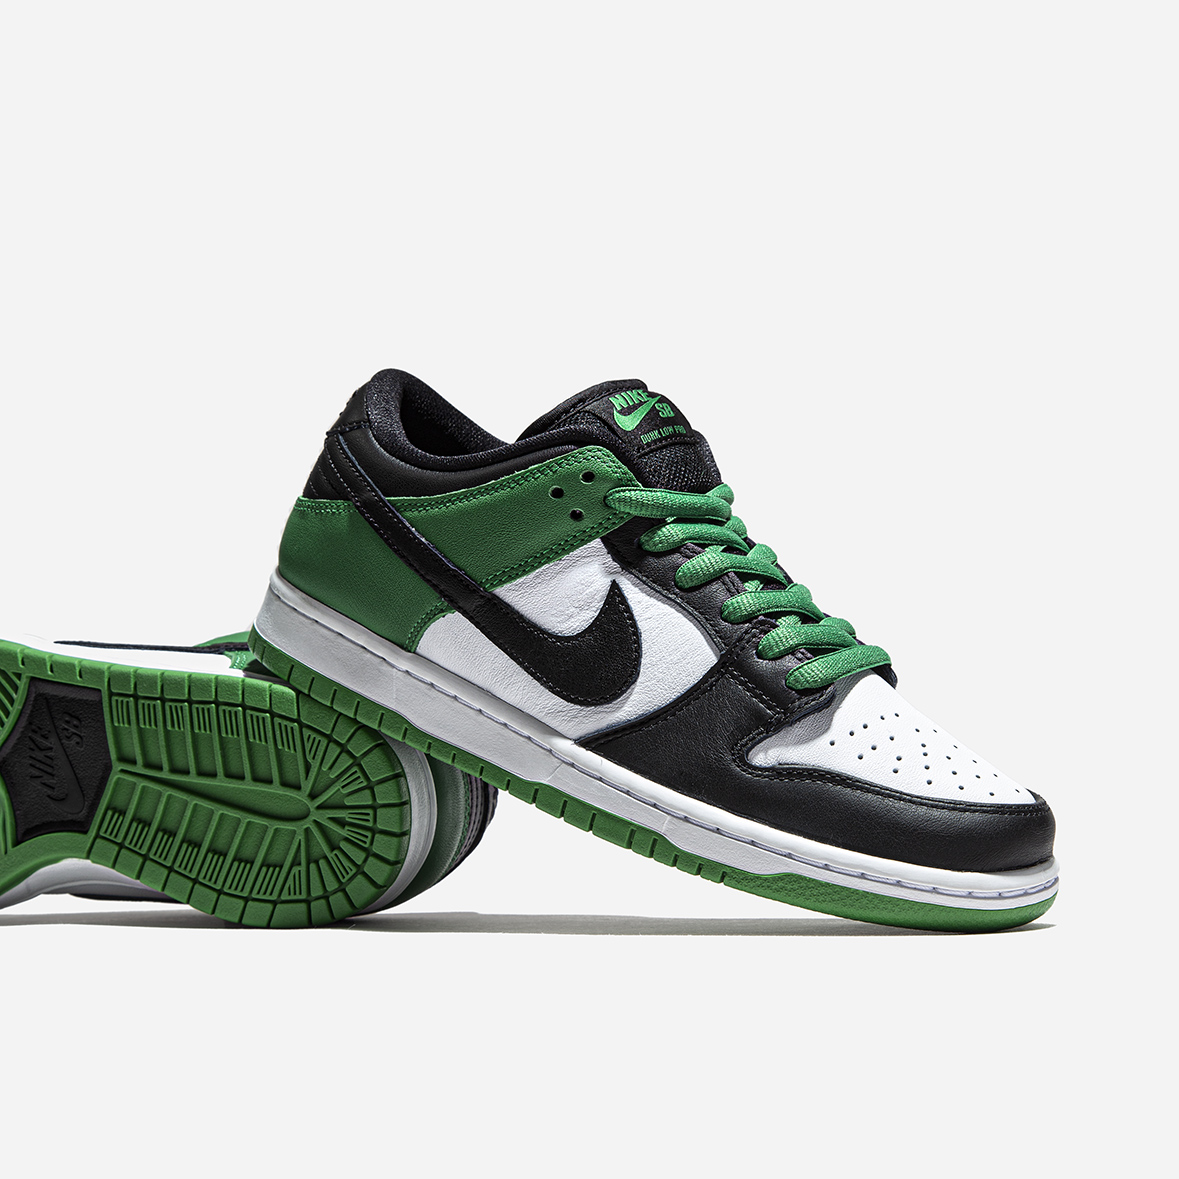 Implacable Mecánica champú Nike SB Dunk Low Pro 'Classic Green' / Consortium